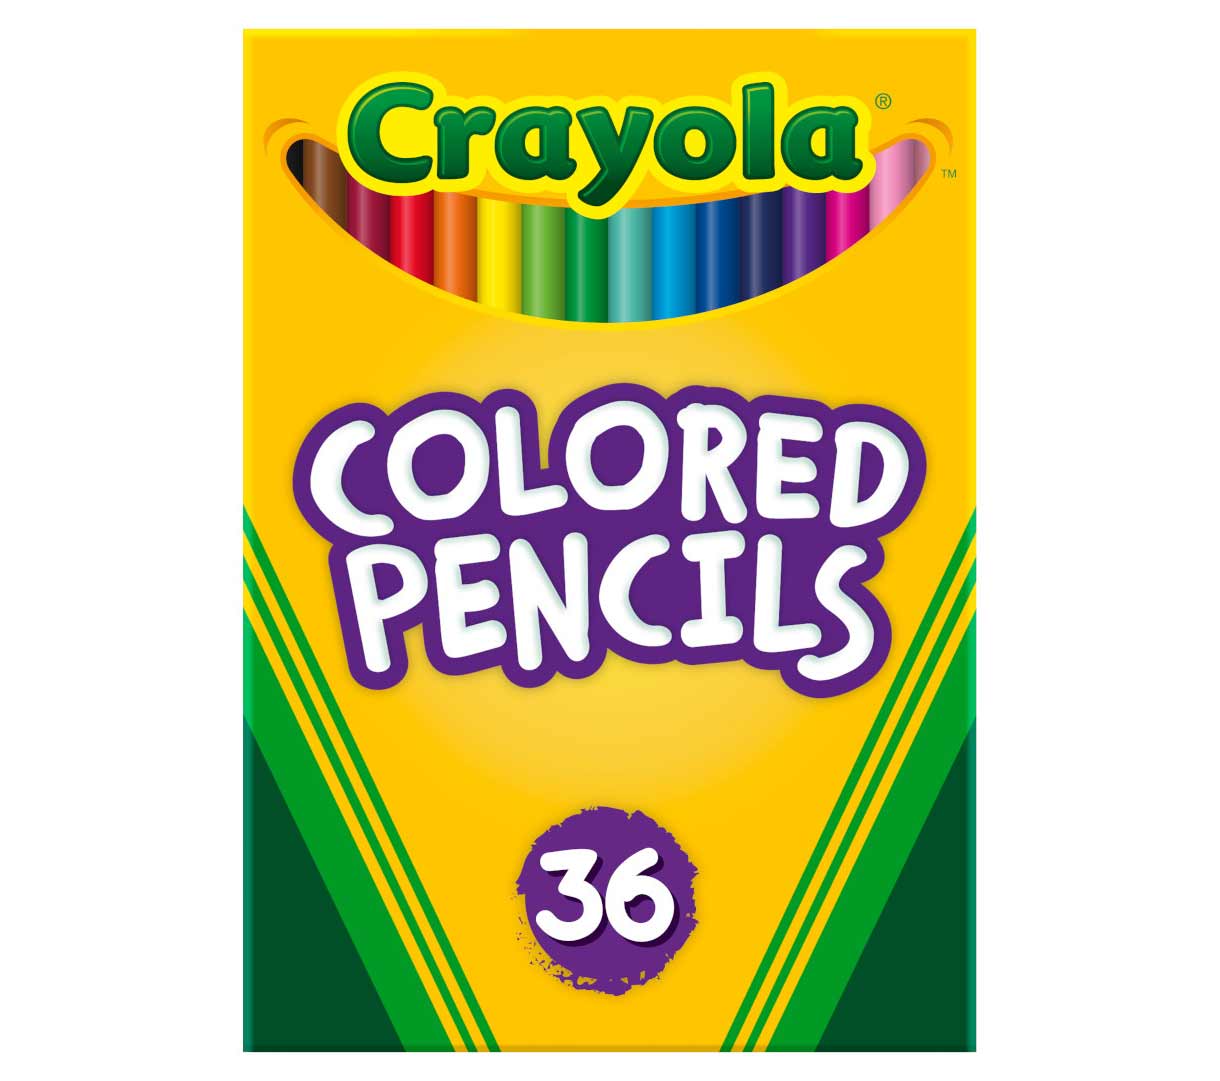 12 Packs: 36 ct. (432) Crayola® Colored Pencils